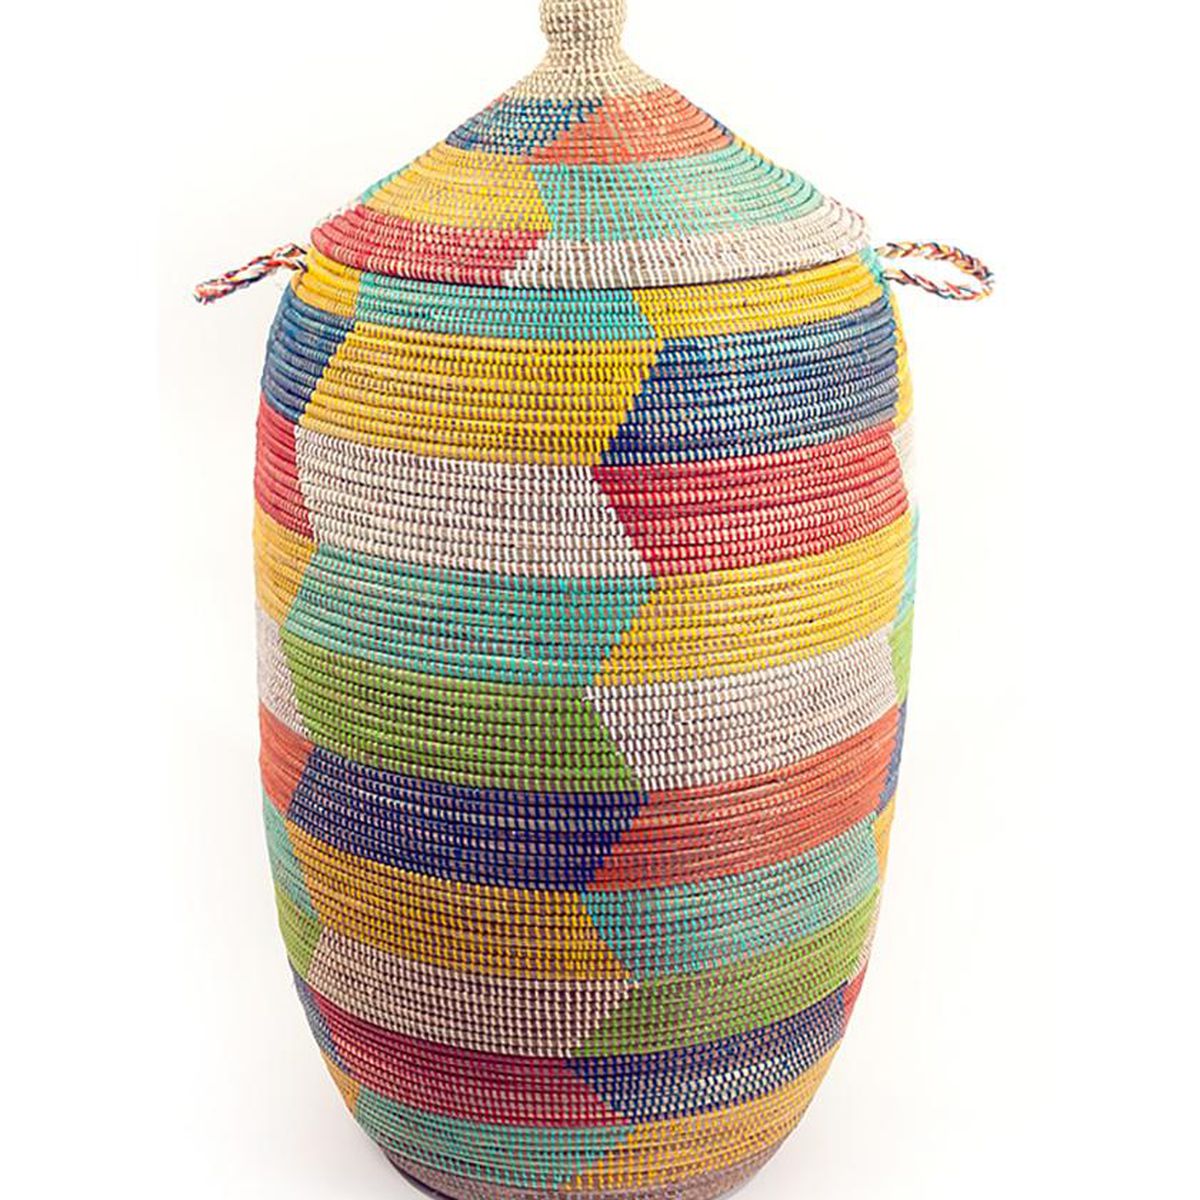 A tall basket with lid woven from multi-color reed